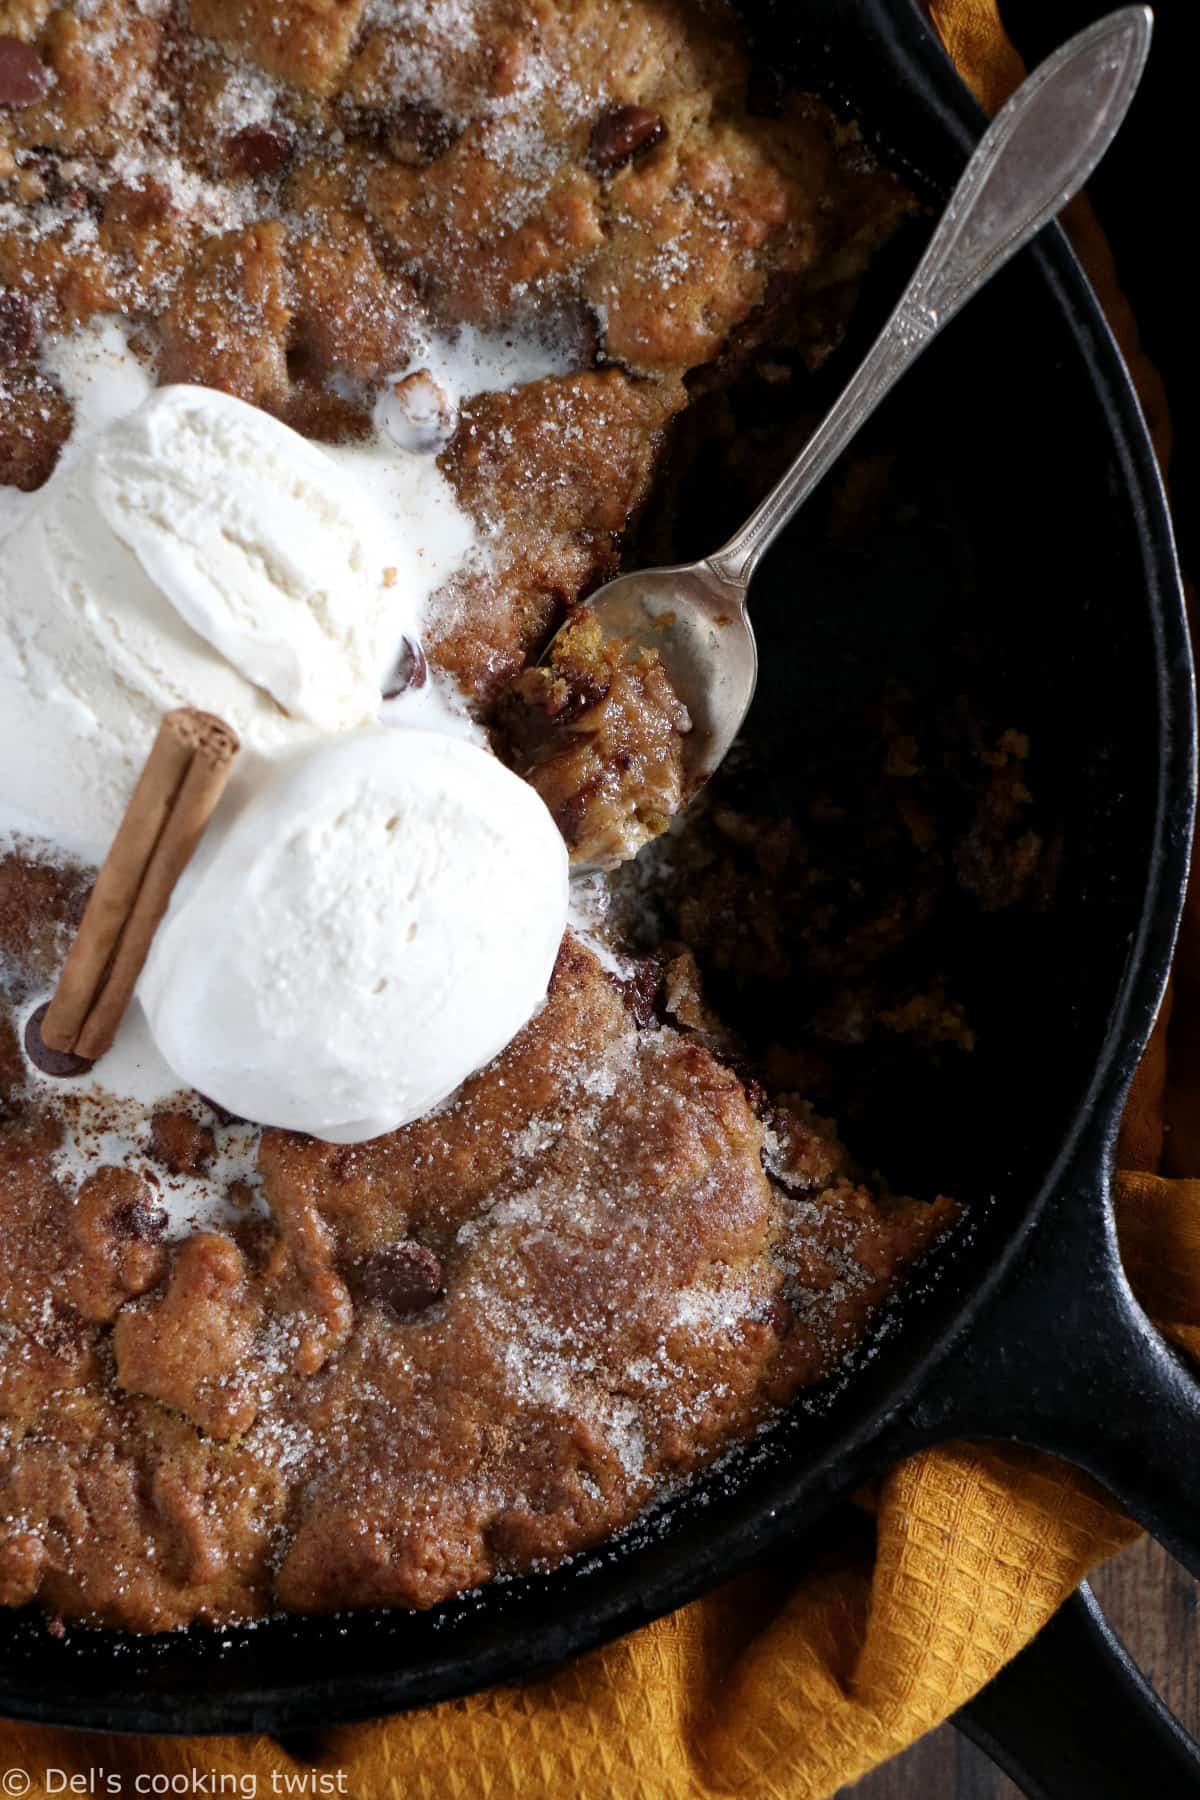 This pumpkin skillet cookie is rich, incredibly fudgy, loaded with chocolate chips and pumpkin spice flavors.